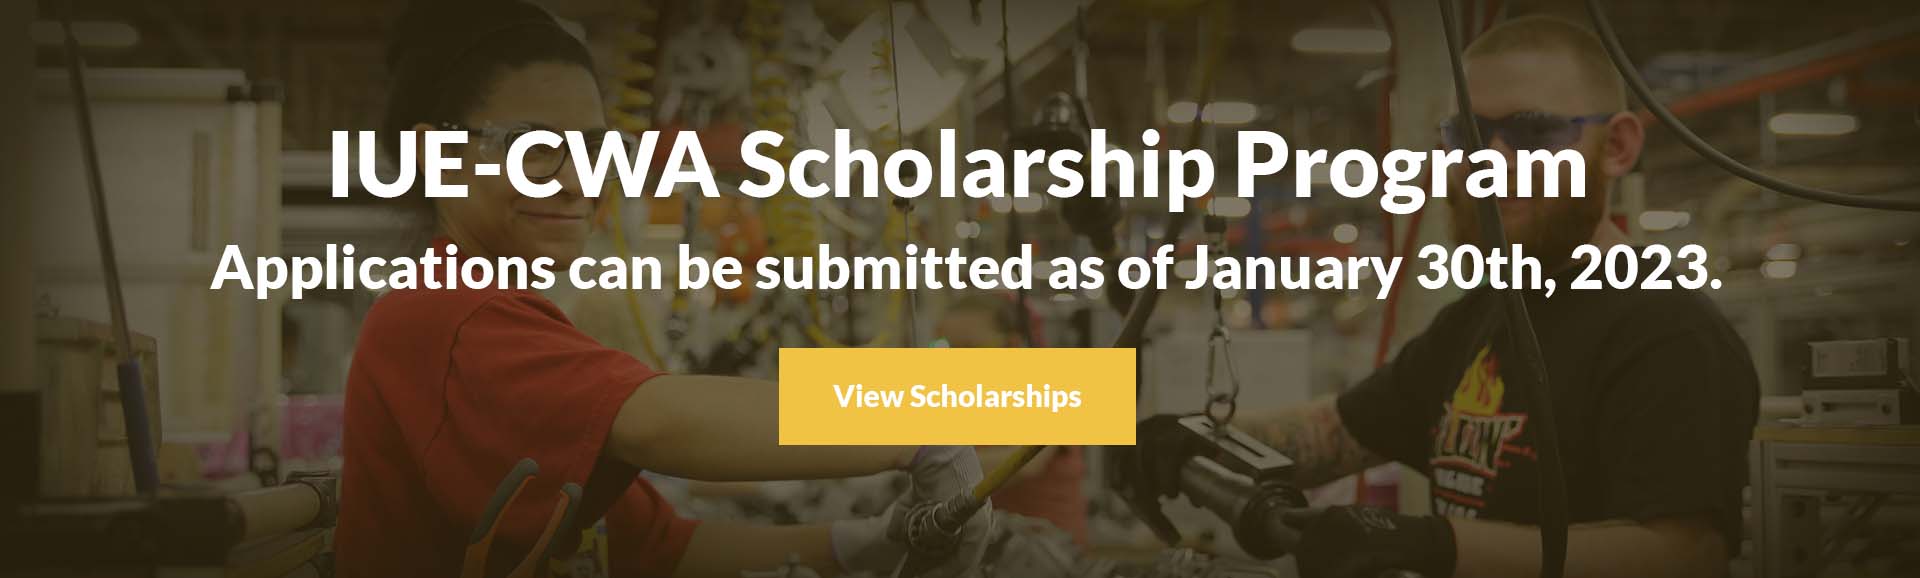 Scholarship Applications can be submitted as of January 30th, 2023